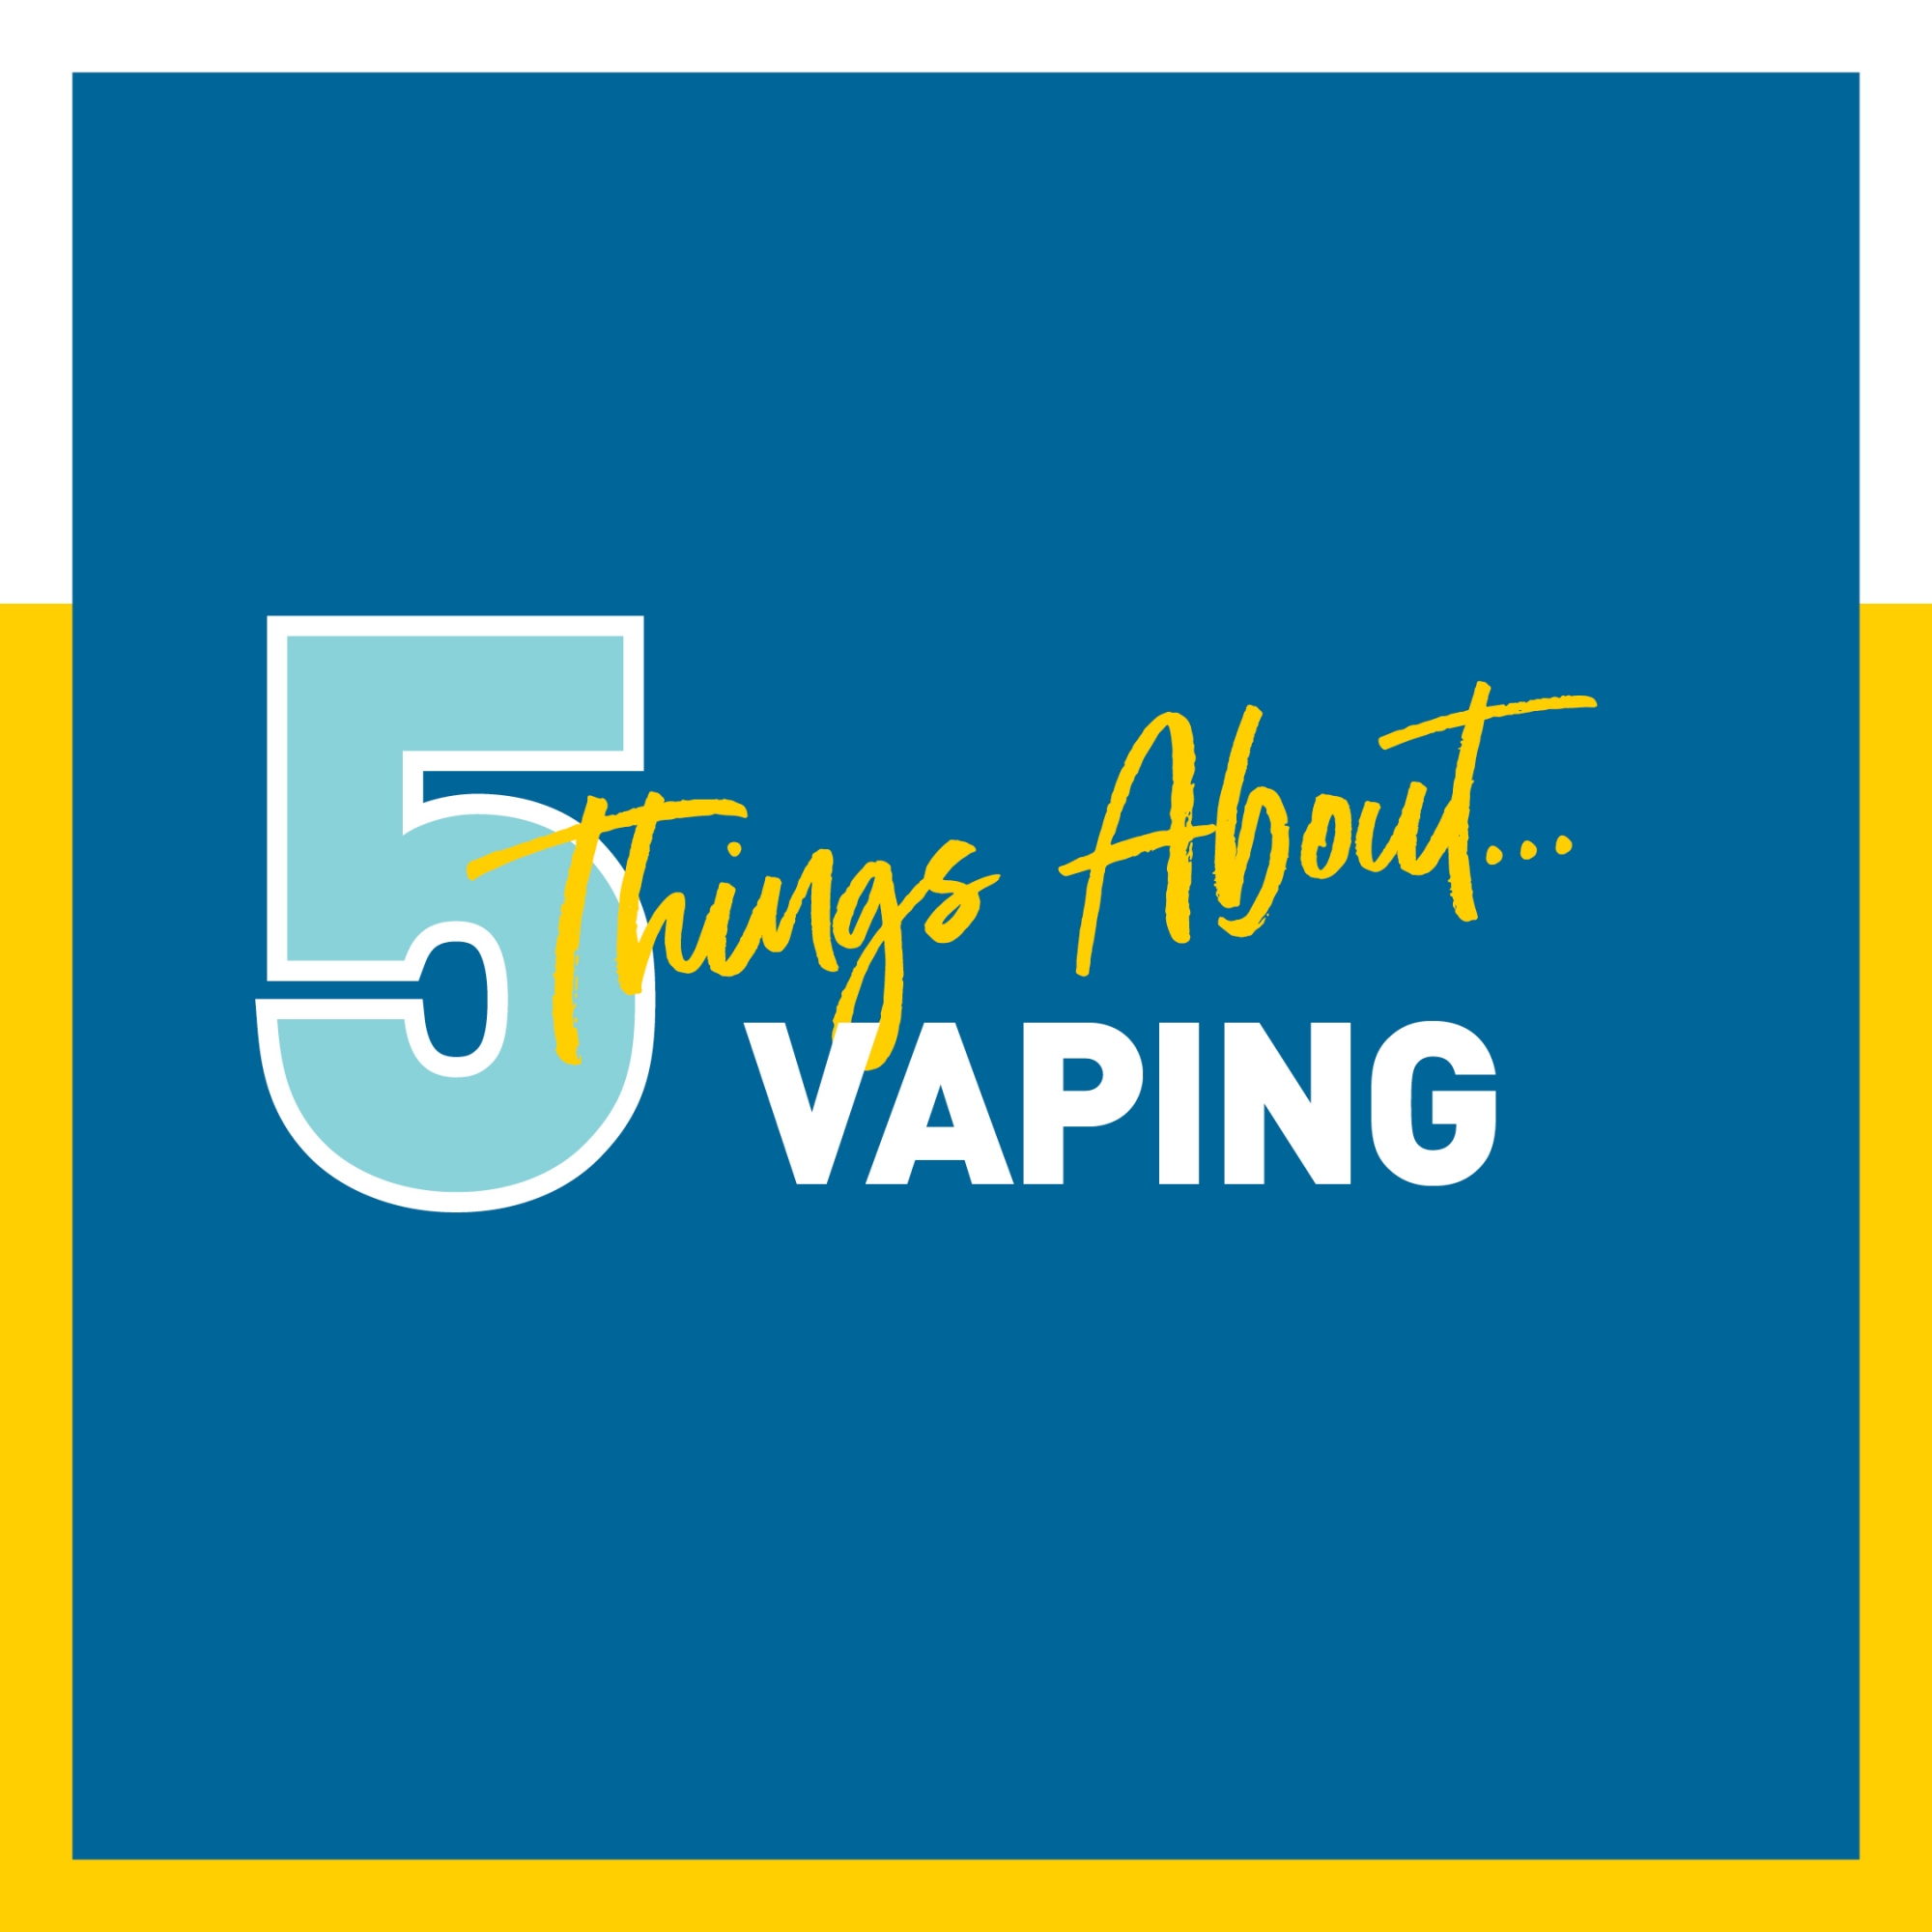 5 Things About Vaping